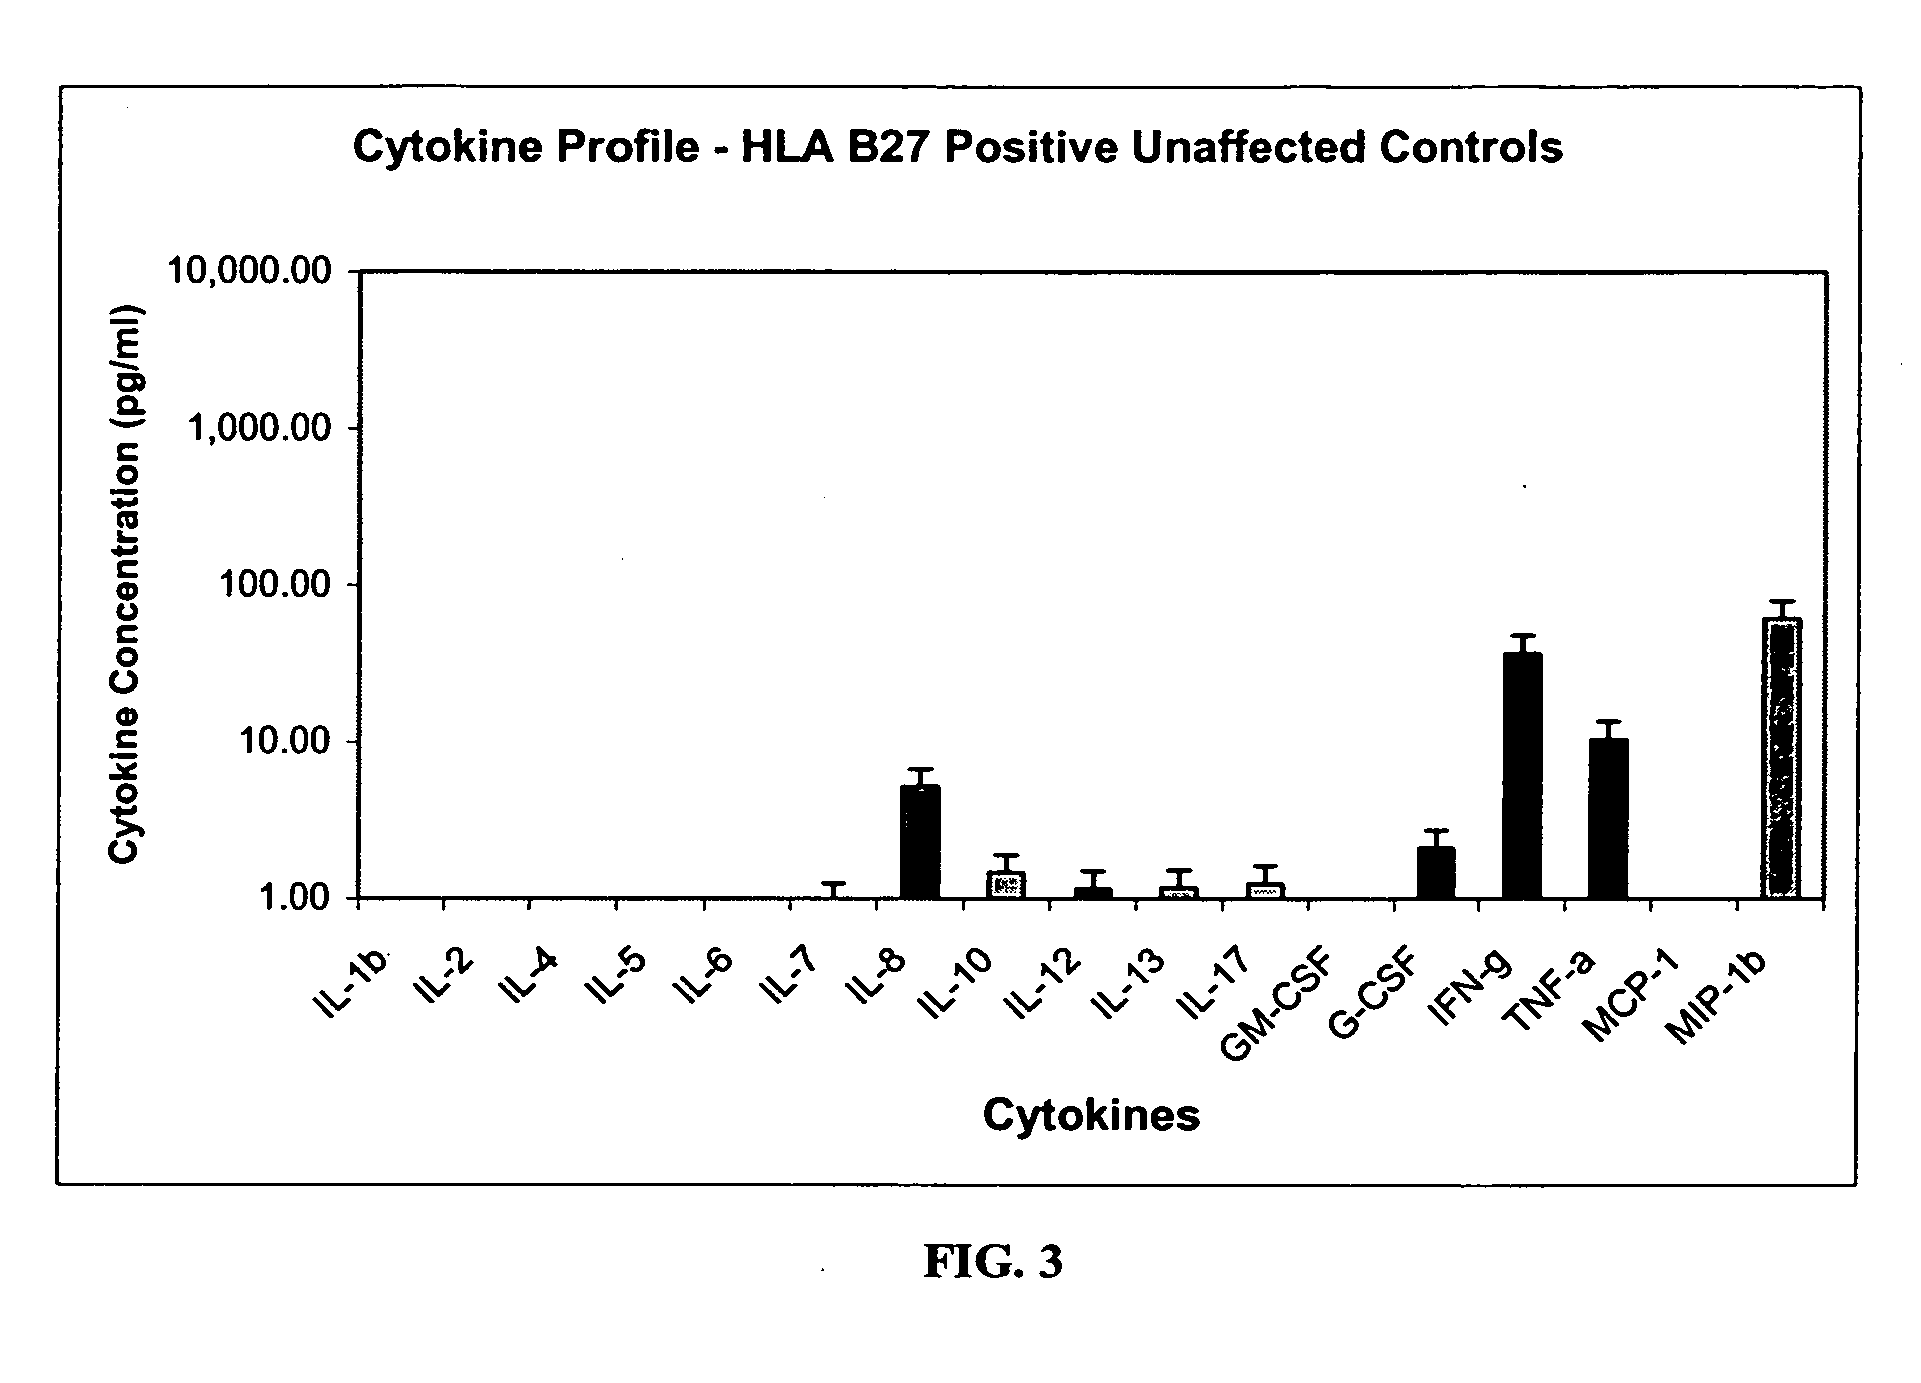 Method of using cytokine assays to diagnose treat, and evaluate inflammatory and autoimmune diseases